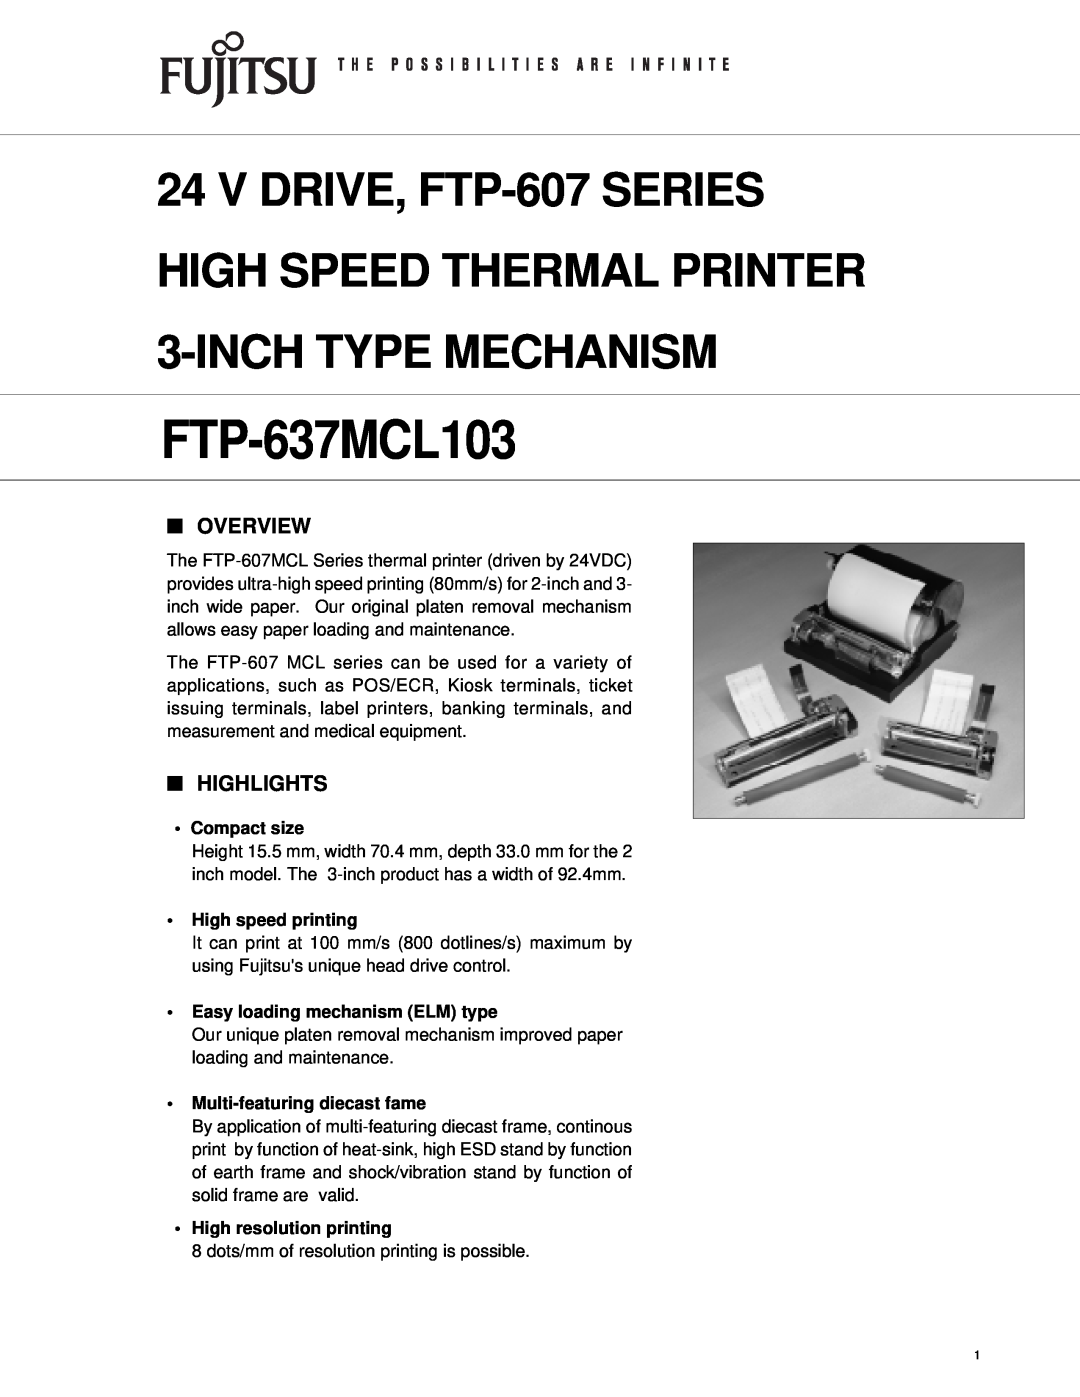 Fujitsu FTP-637MCL103 manual Overview, Highlights, Compact size, High speed printing, Easy loading mechanism ELM type 